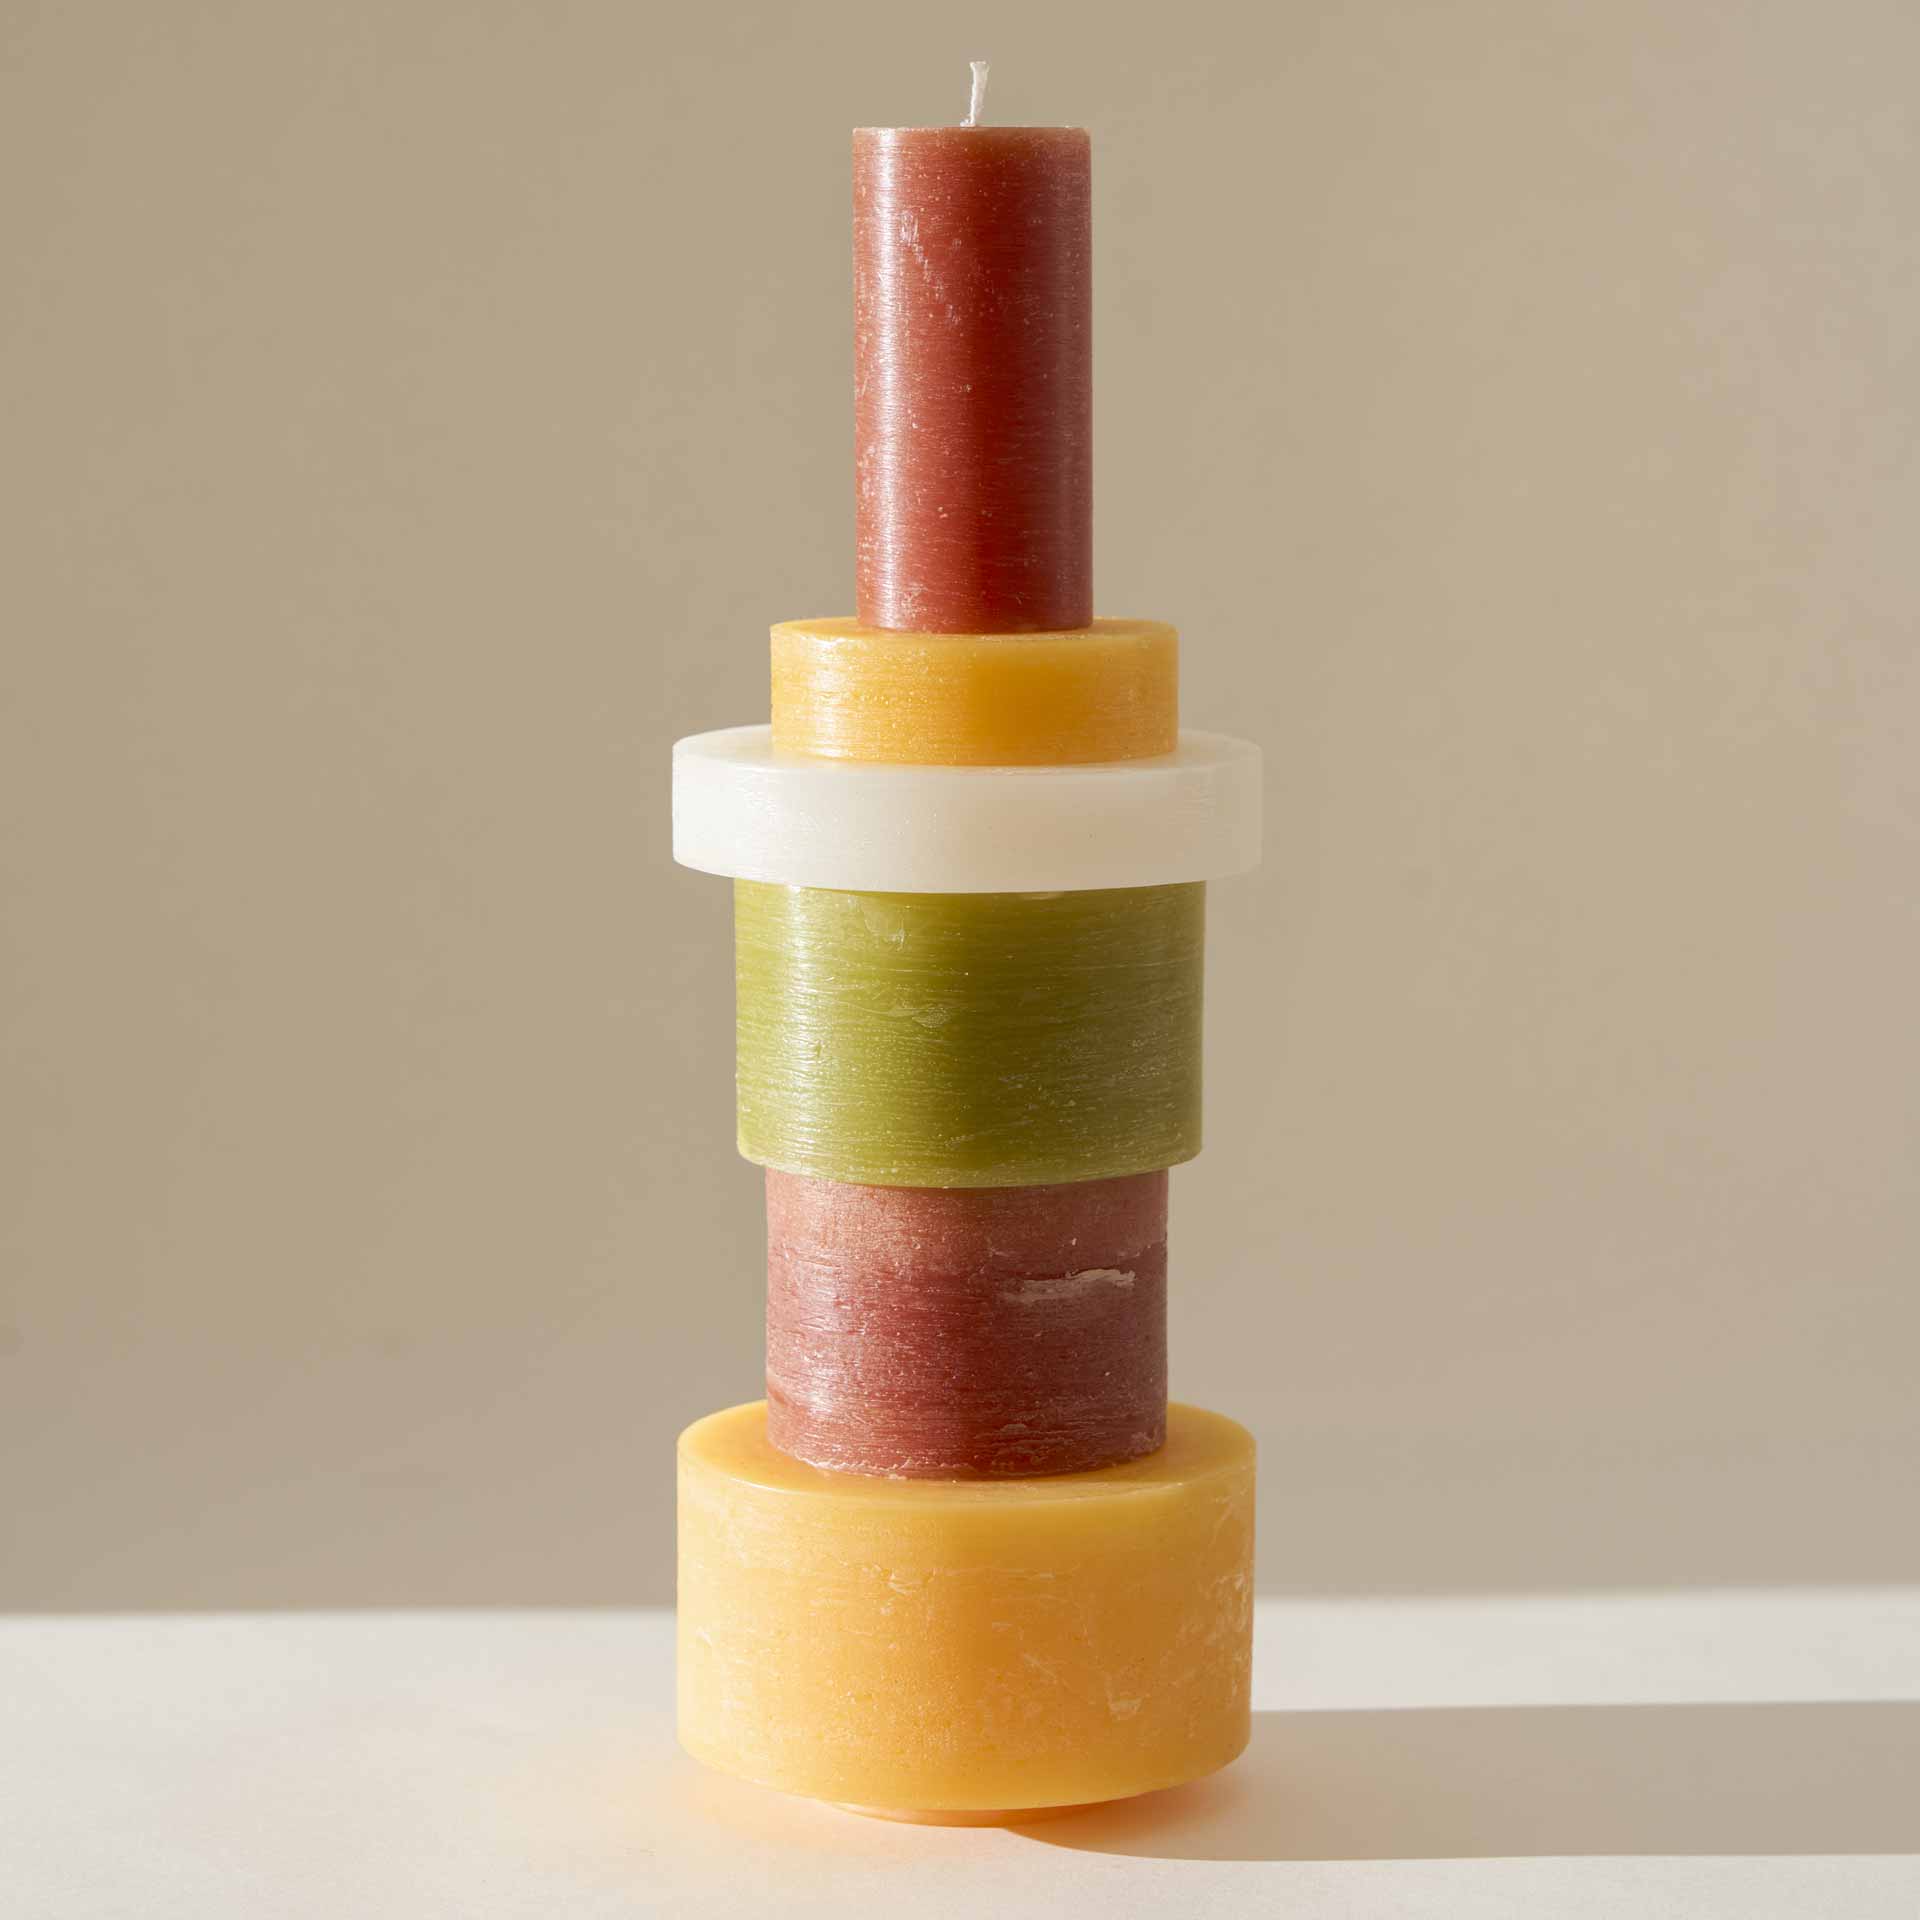 Candl Stack 06 (Design Museum Ghent Edition) - Stan Editions